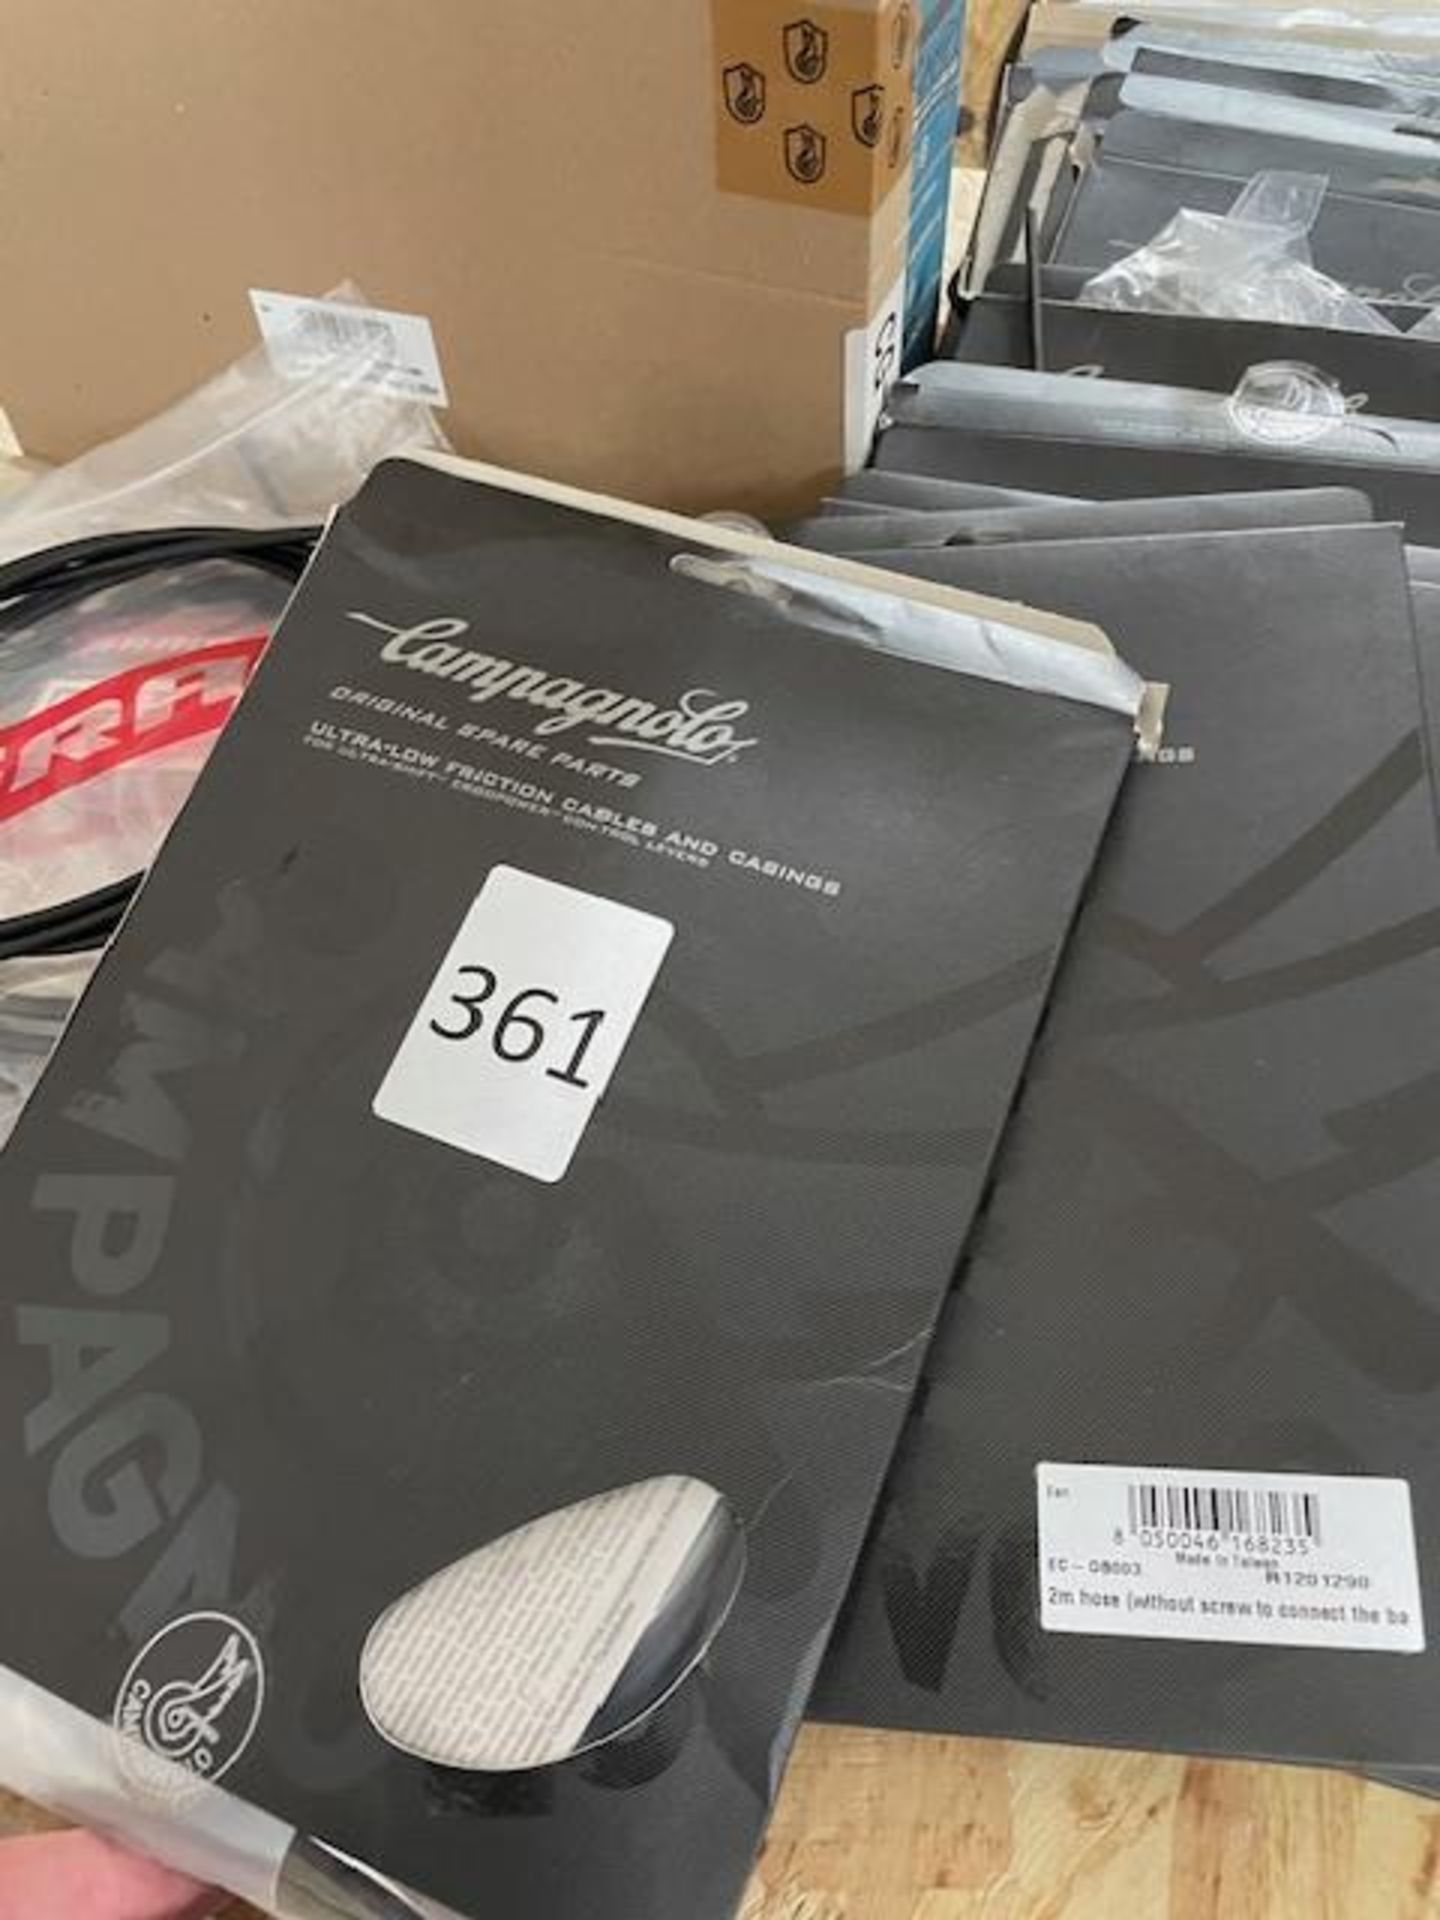 20 Boxes of Campagnolo Shifting Kits & 2m Hoses (Location: Newport Pagnell. Please Refer to